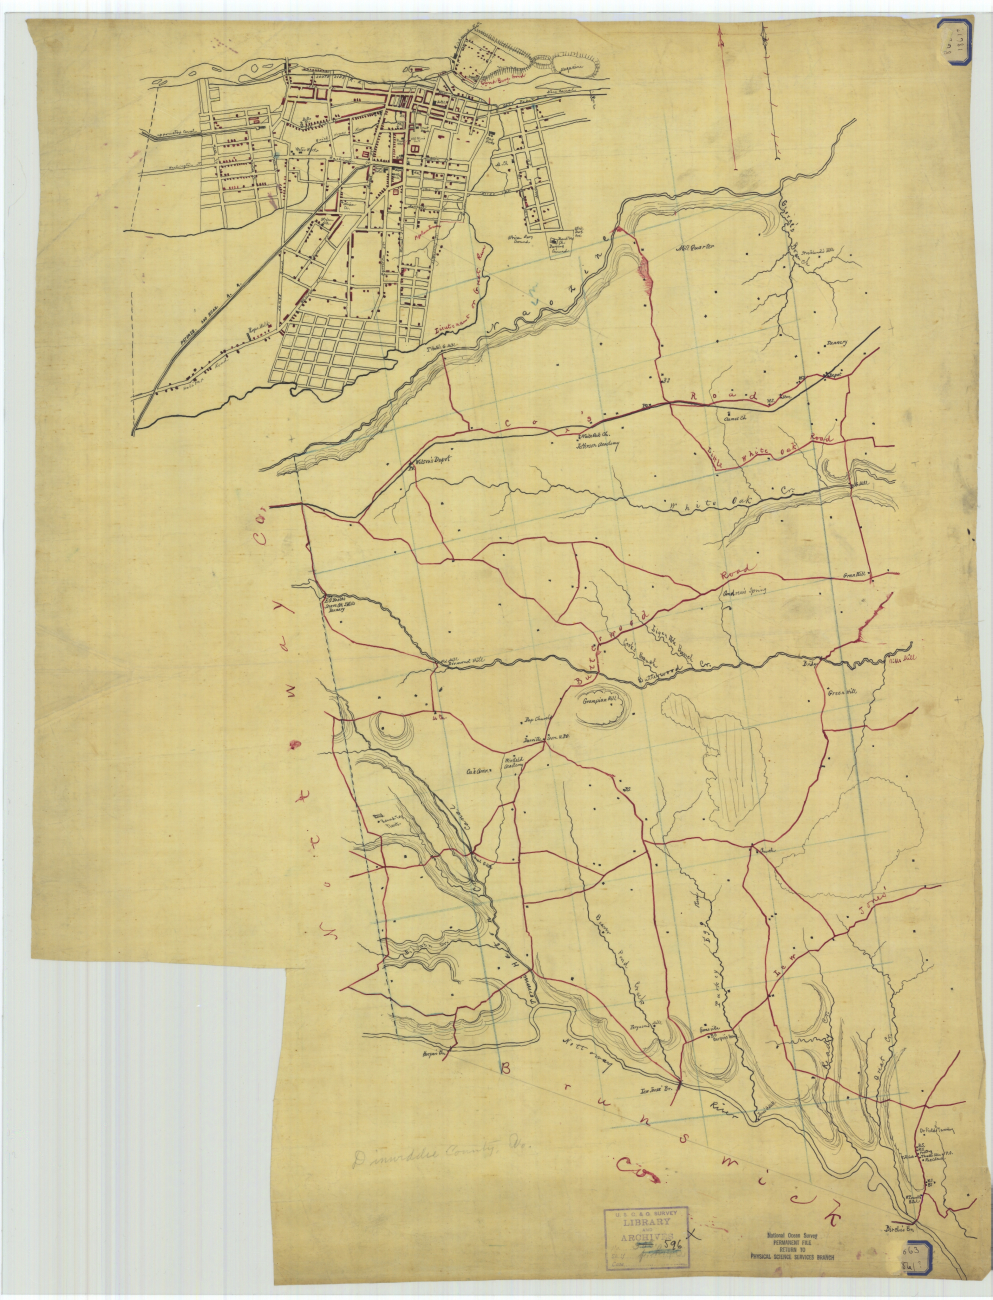 What seems to be a hand-drawn sketch or tracing of the Petersburg area